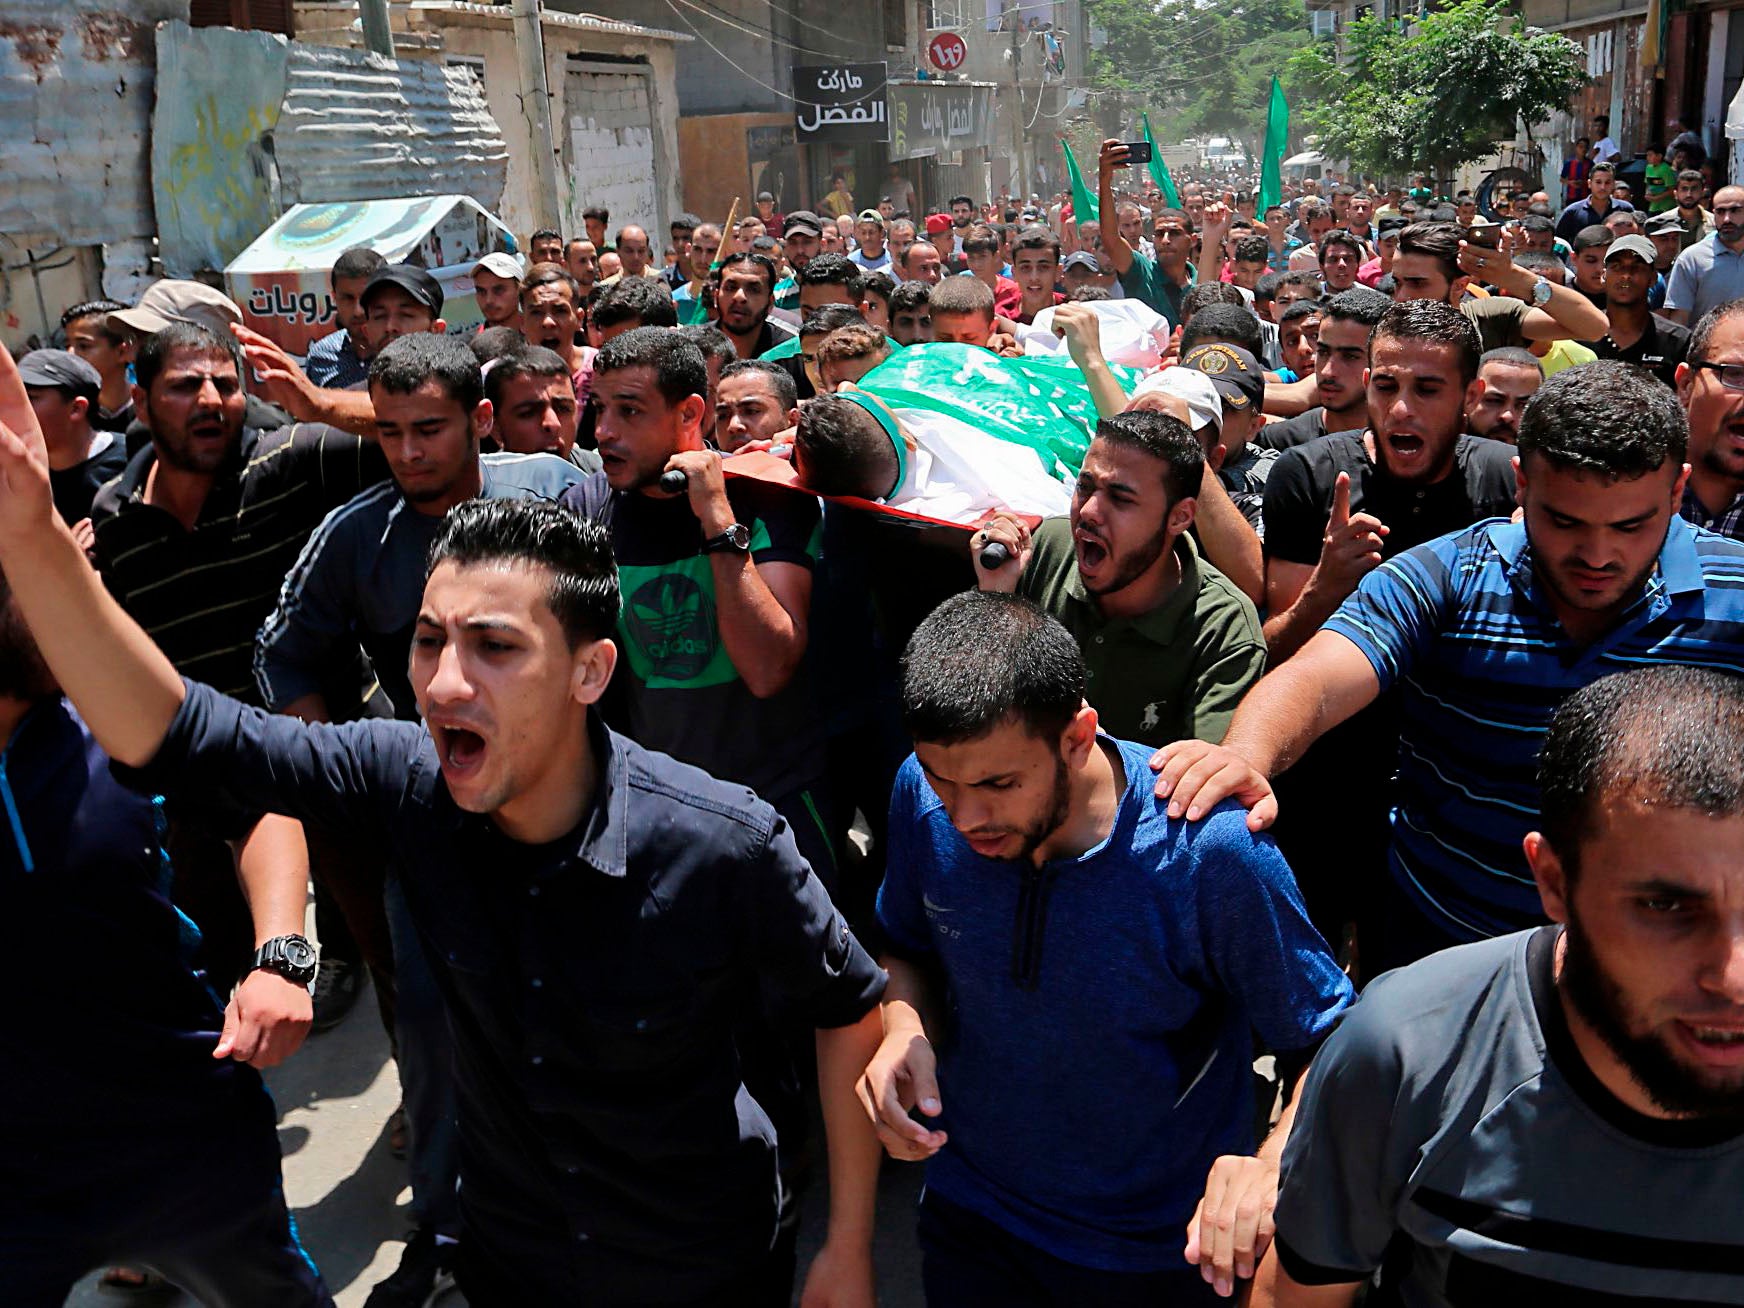 Palestinian mourners carry the body of Muadh al-Suri, aged 15, who was killed in clashes with Israeli forces the day before, during his funeral in Nuseirat camp, in central Gaza Strip, on August 4, 2018